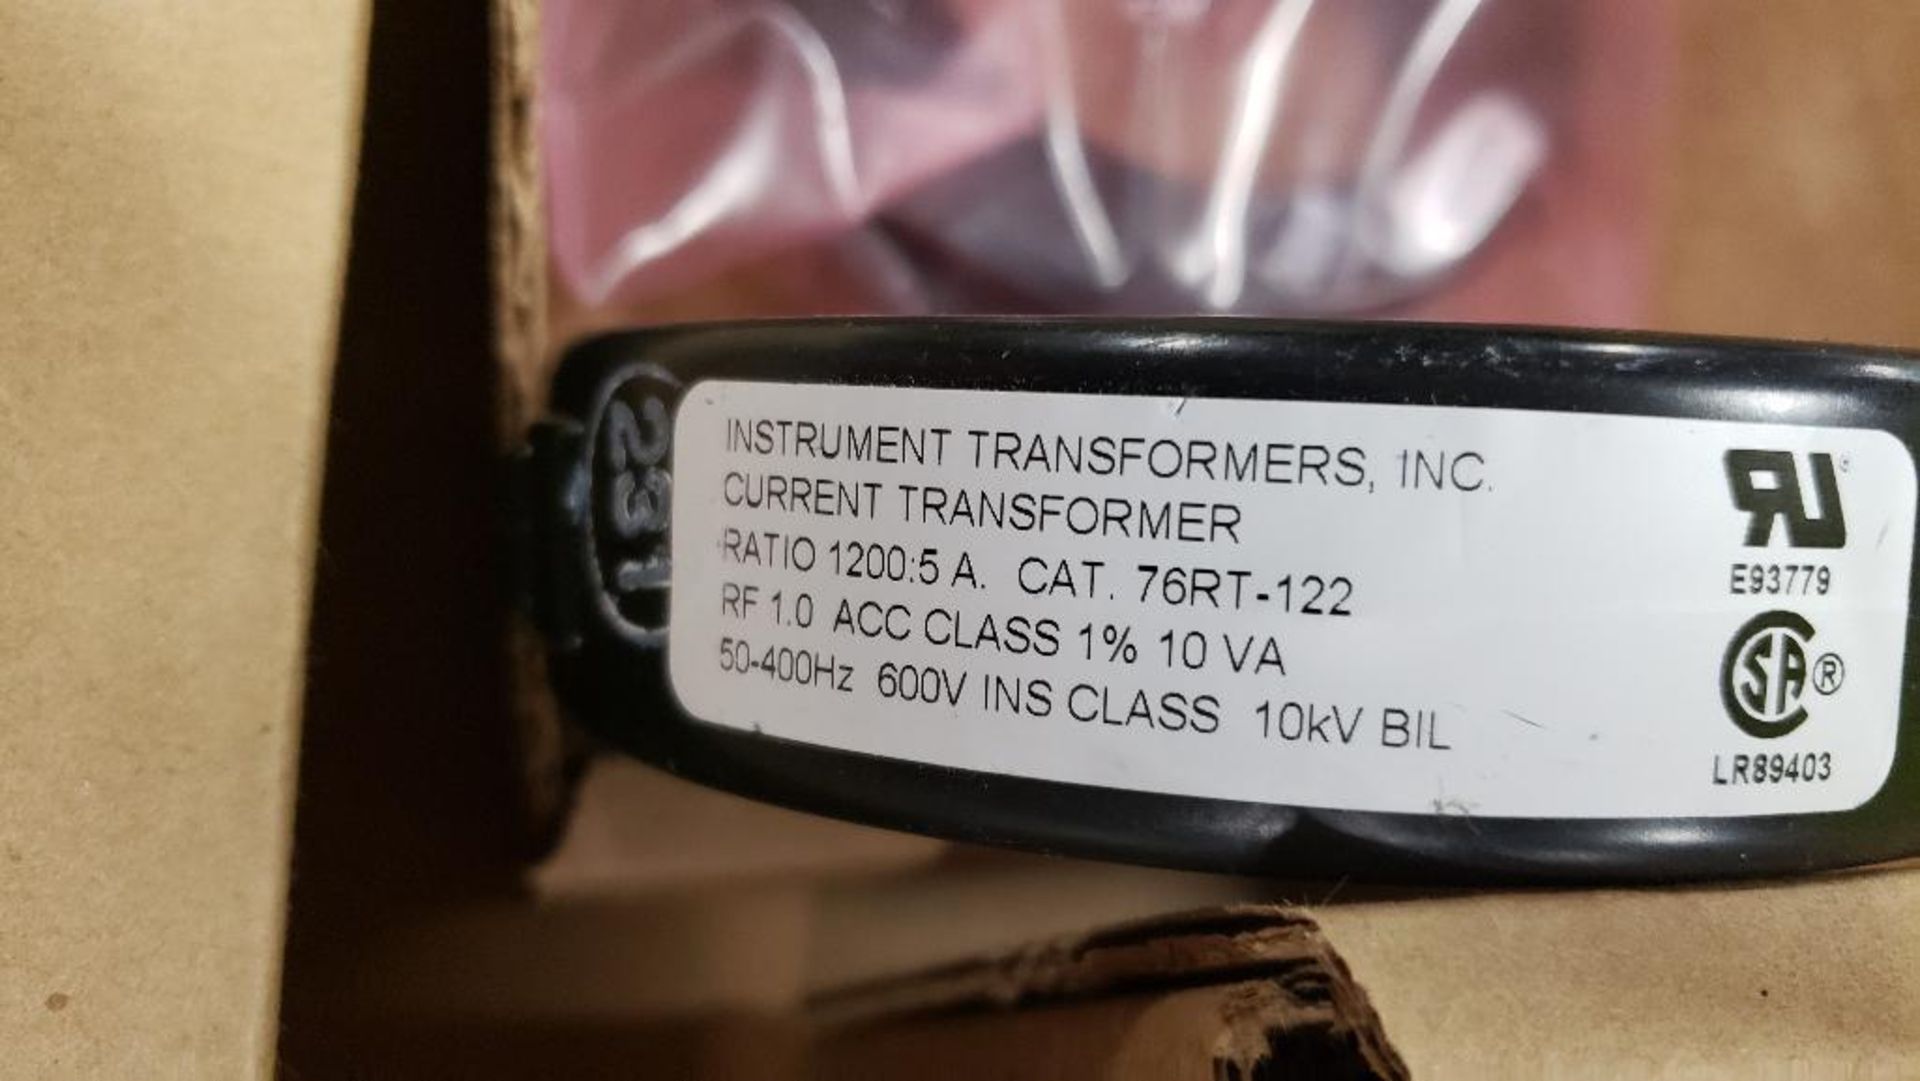 Qty 4 - Instrument Transformers current transformer. Catalog 76RT-122. New as pictured. - Image 3 of 3